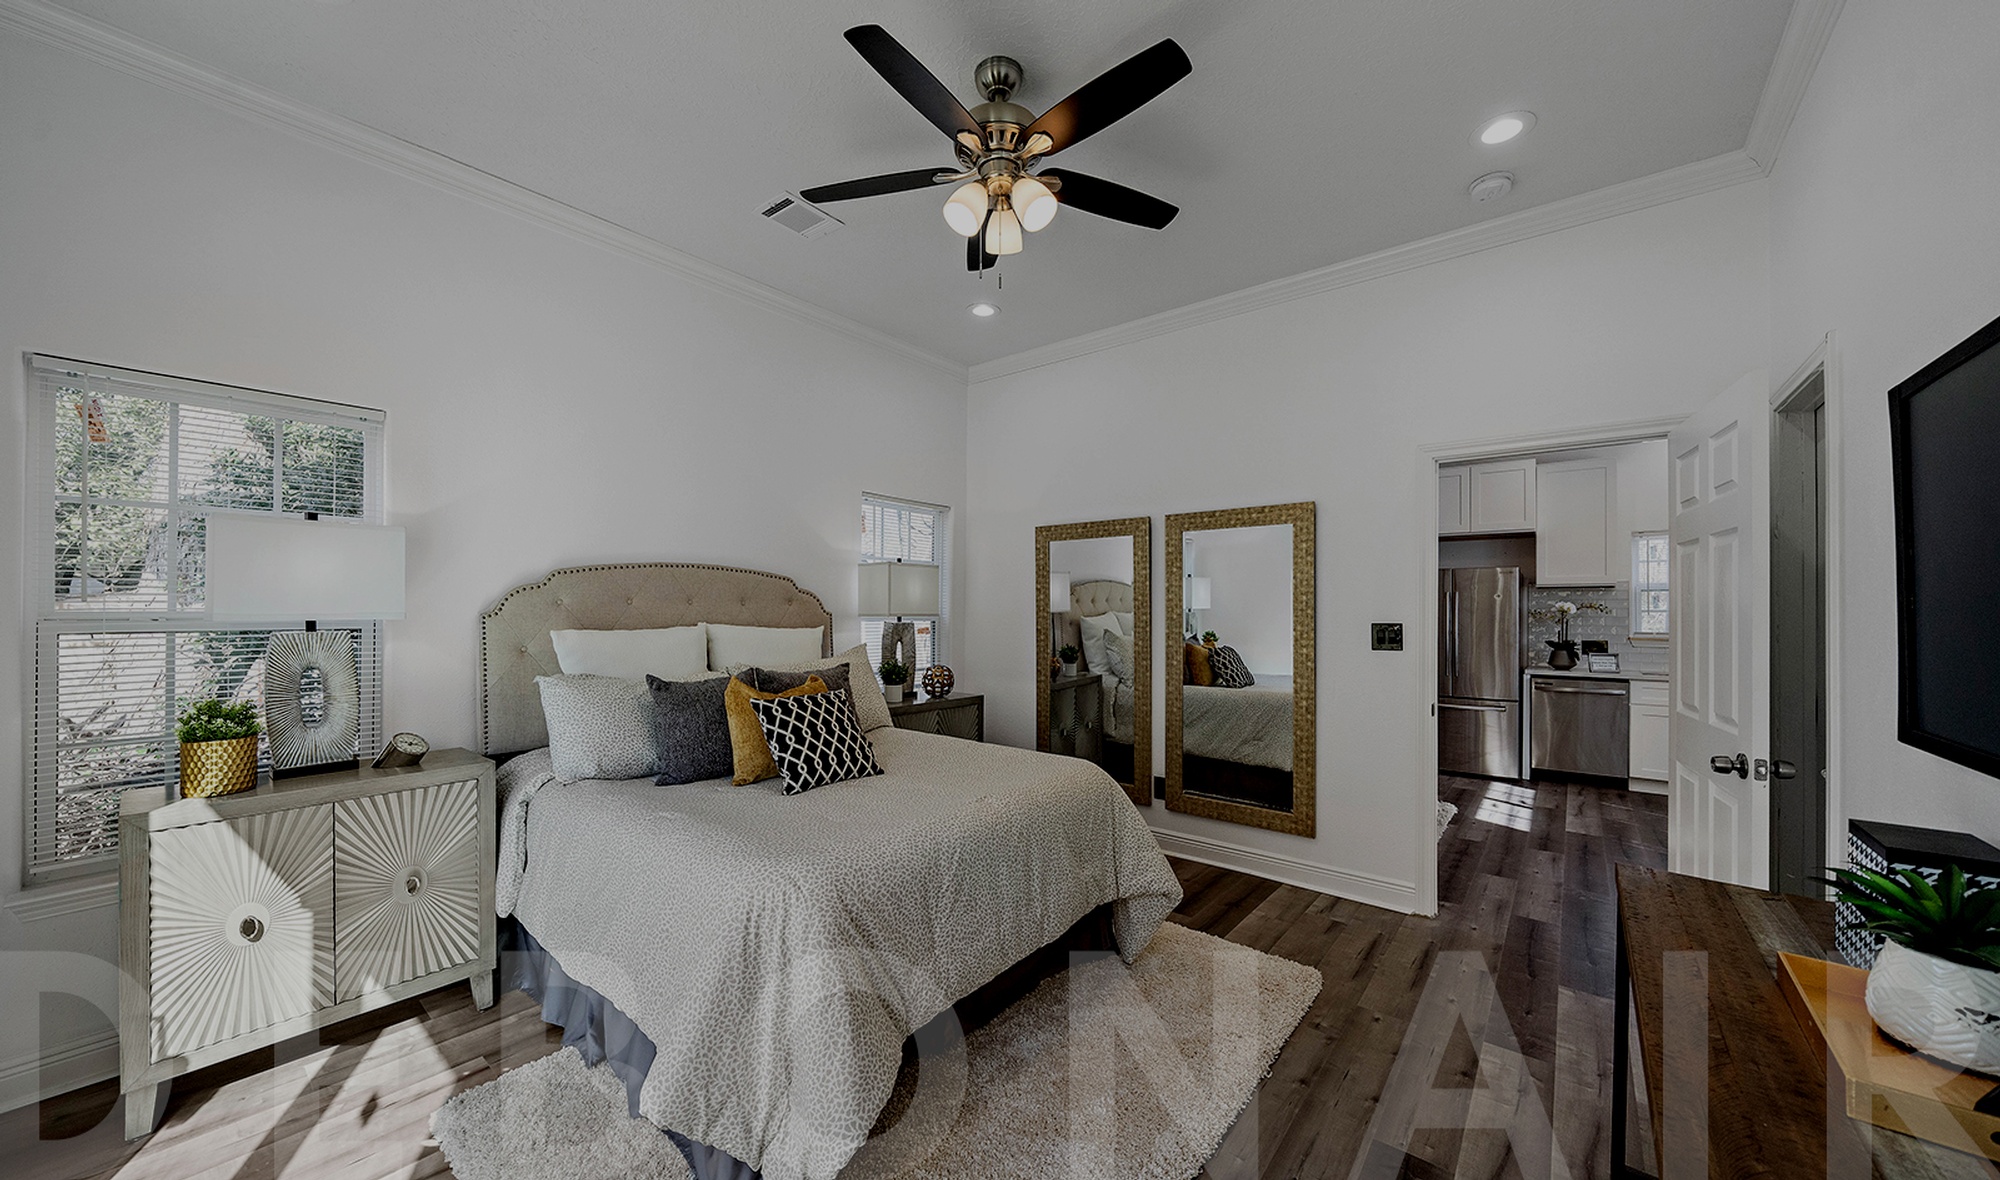 Debonair Home Staging and Redesign - Pearland Home Staging Company